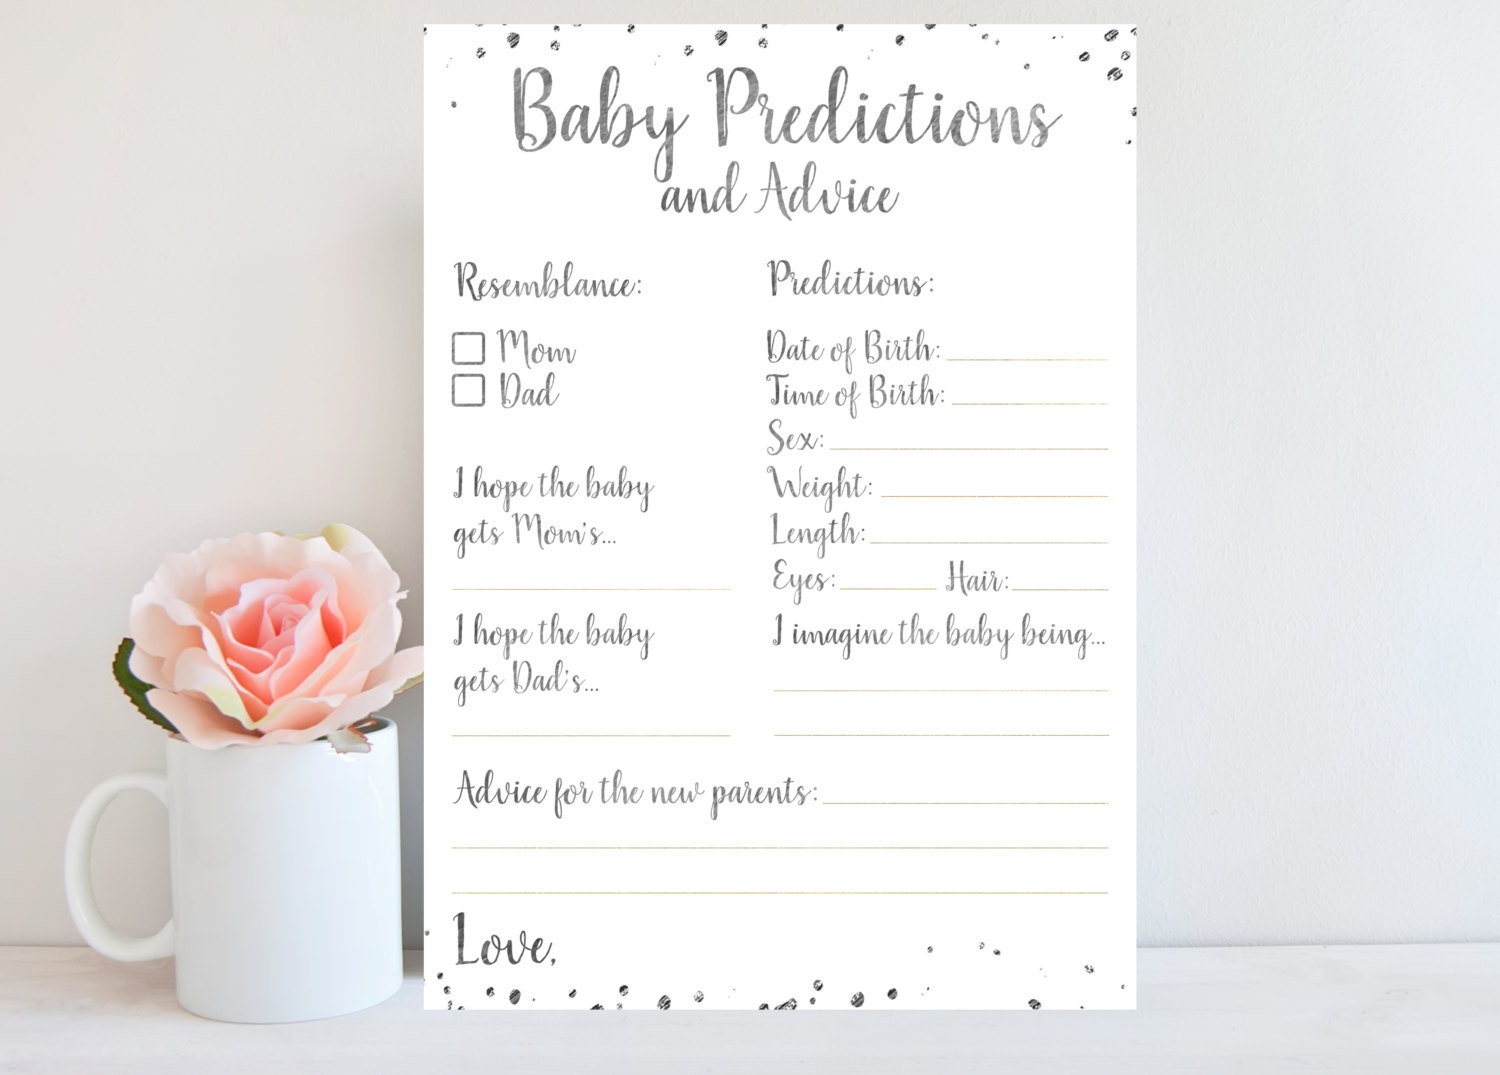 Baby Shower Predictions Card Silver Confetti Baby | Etsy - Baby Prediction And Advice Cards Free Printable